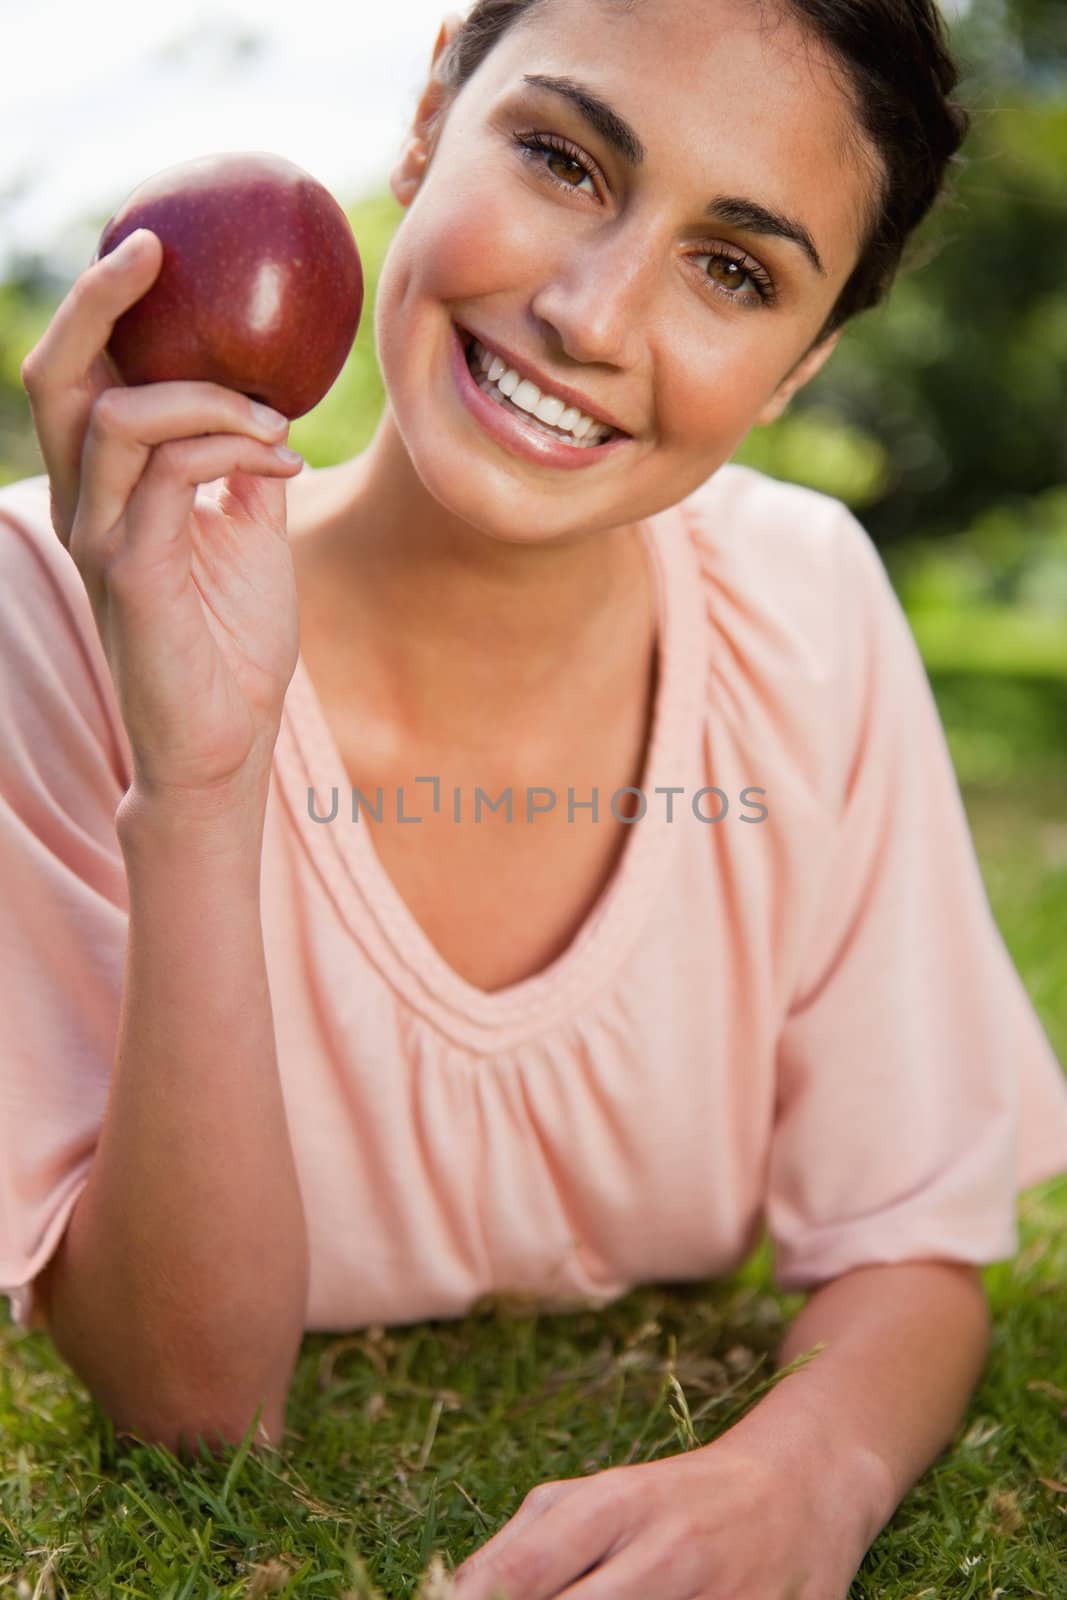 Woman smiles while holding a red apple as she is lying prone in grass